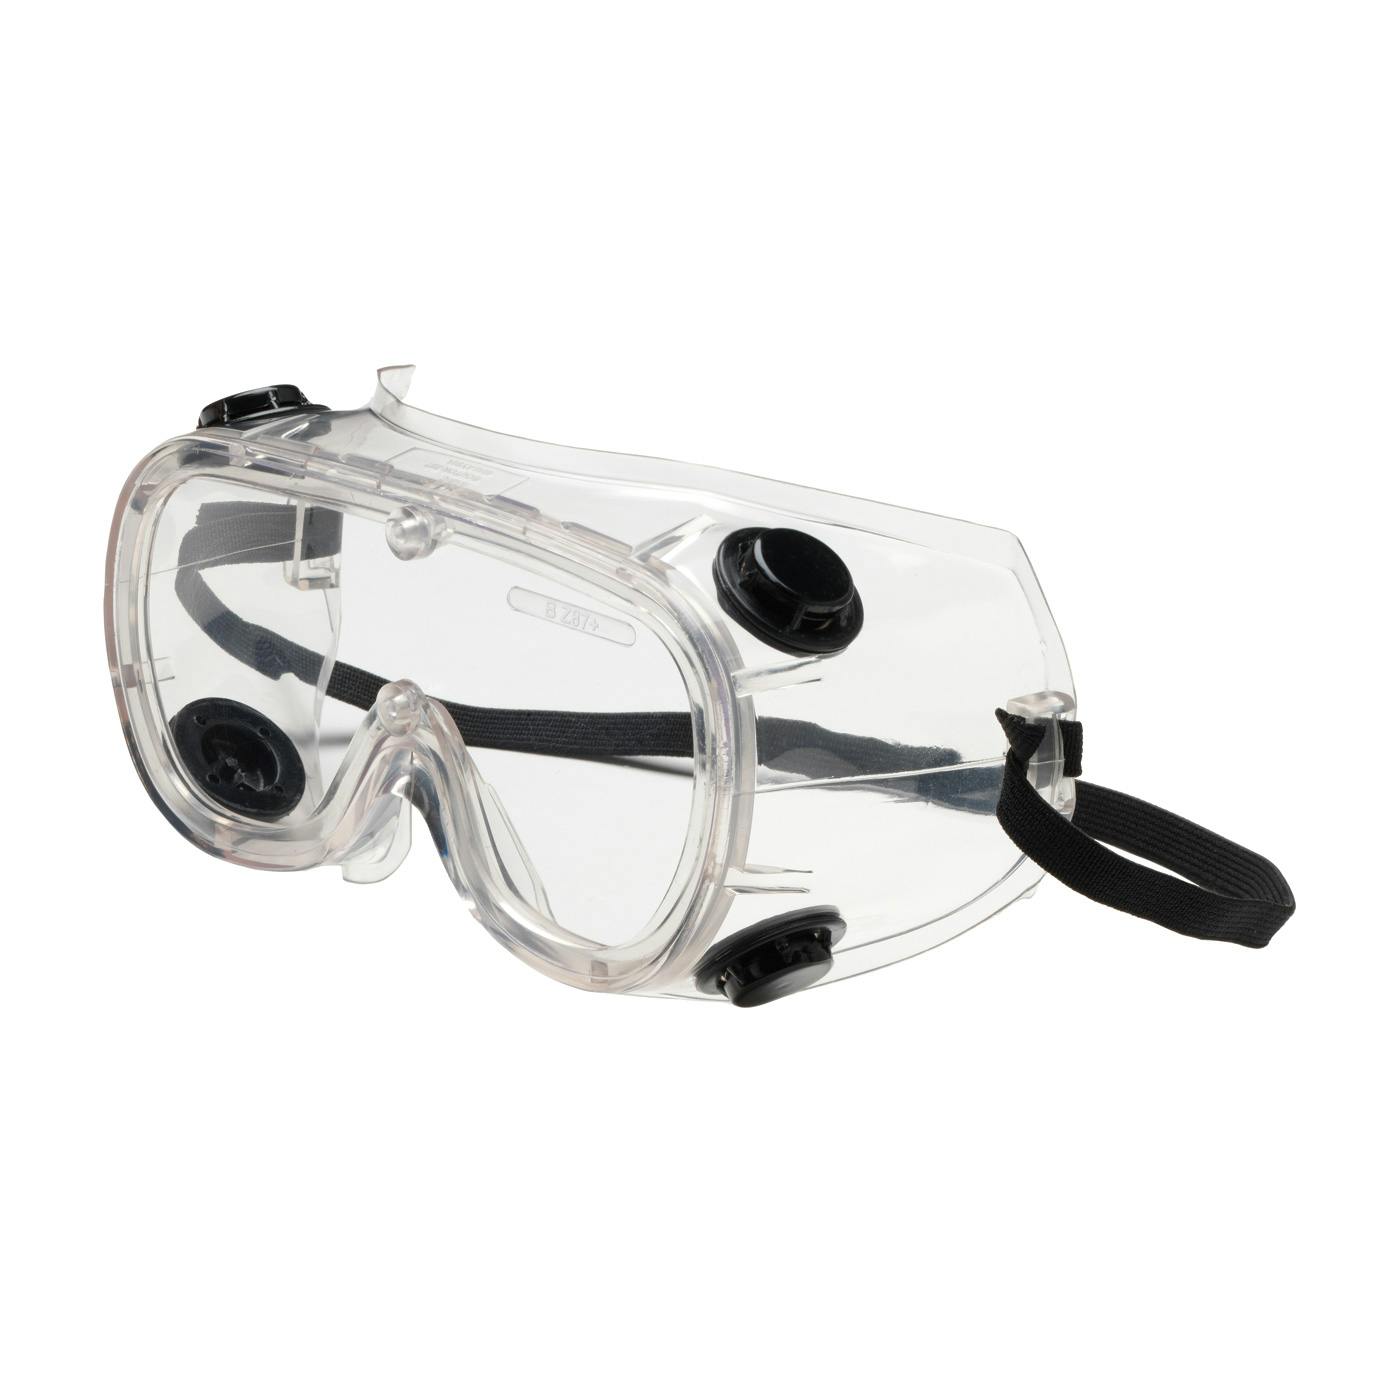 Indirect Vent Goggle with Clear Body and Clear Lens, Clear (248-4401-300) - OS_0